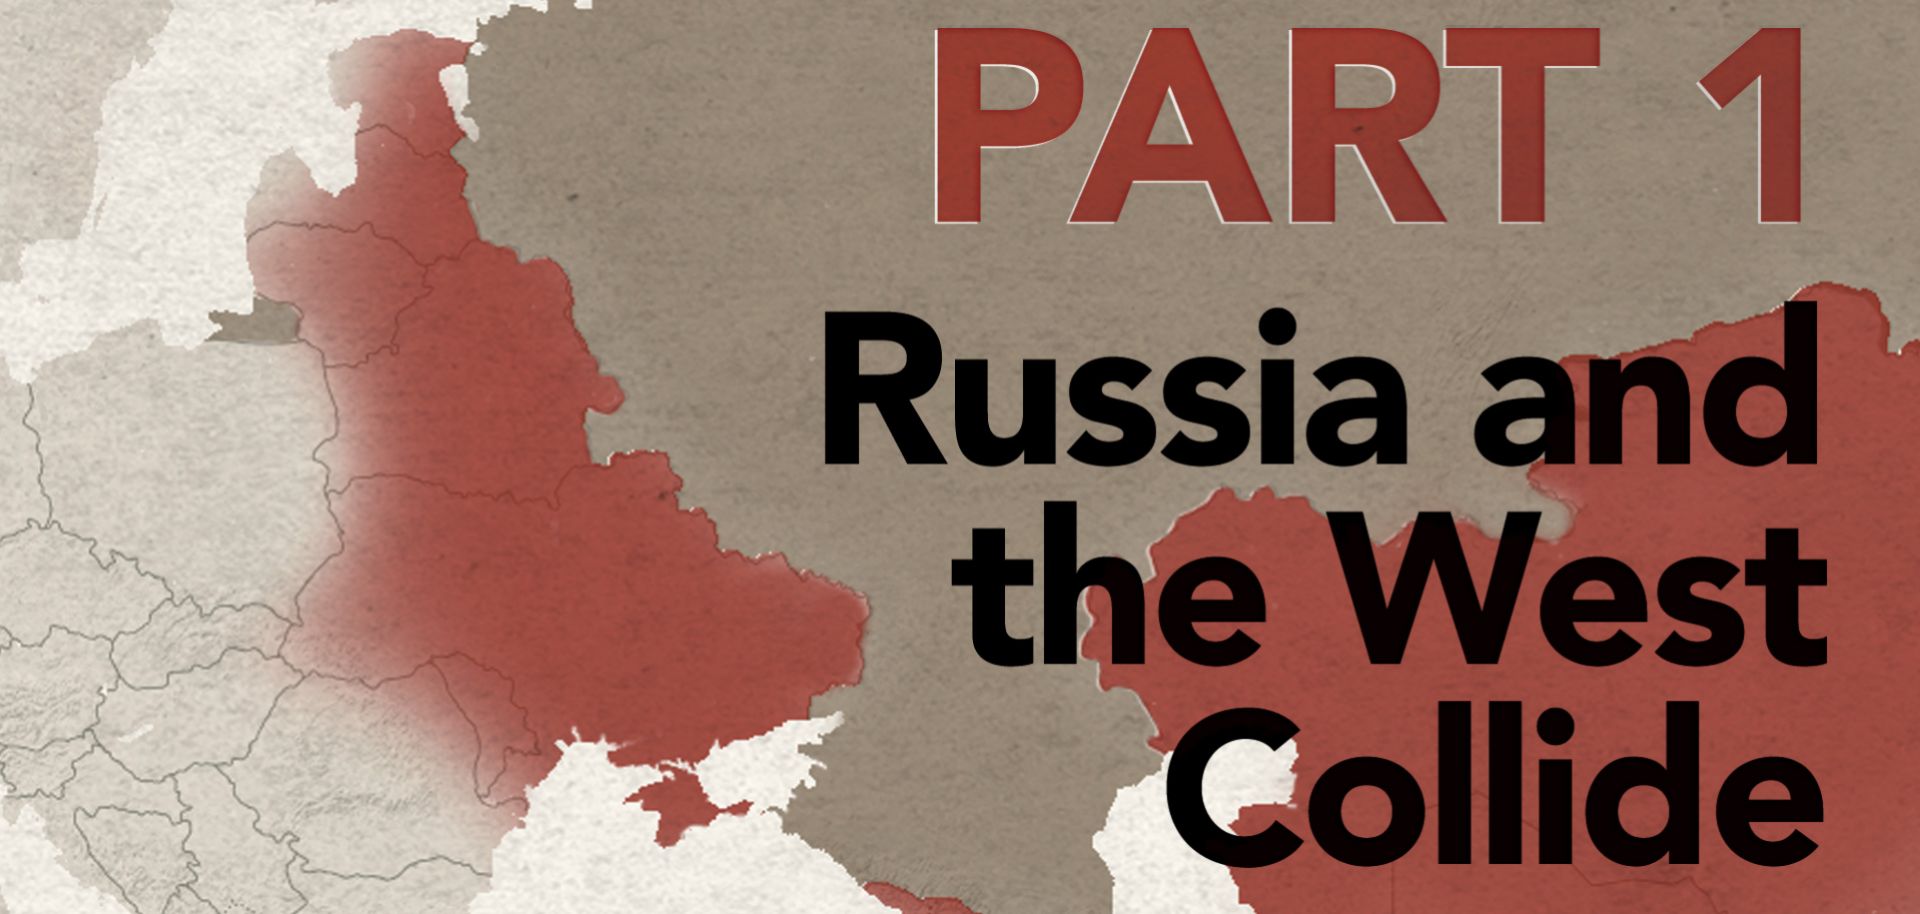 Since its emergence as an organized state, Russia has collided with the West. 